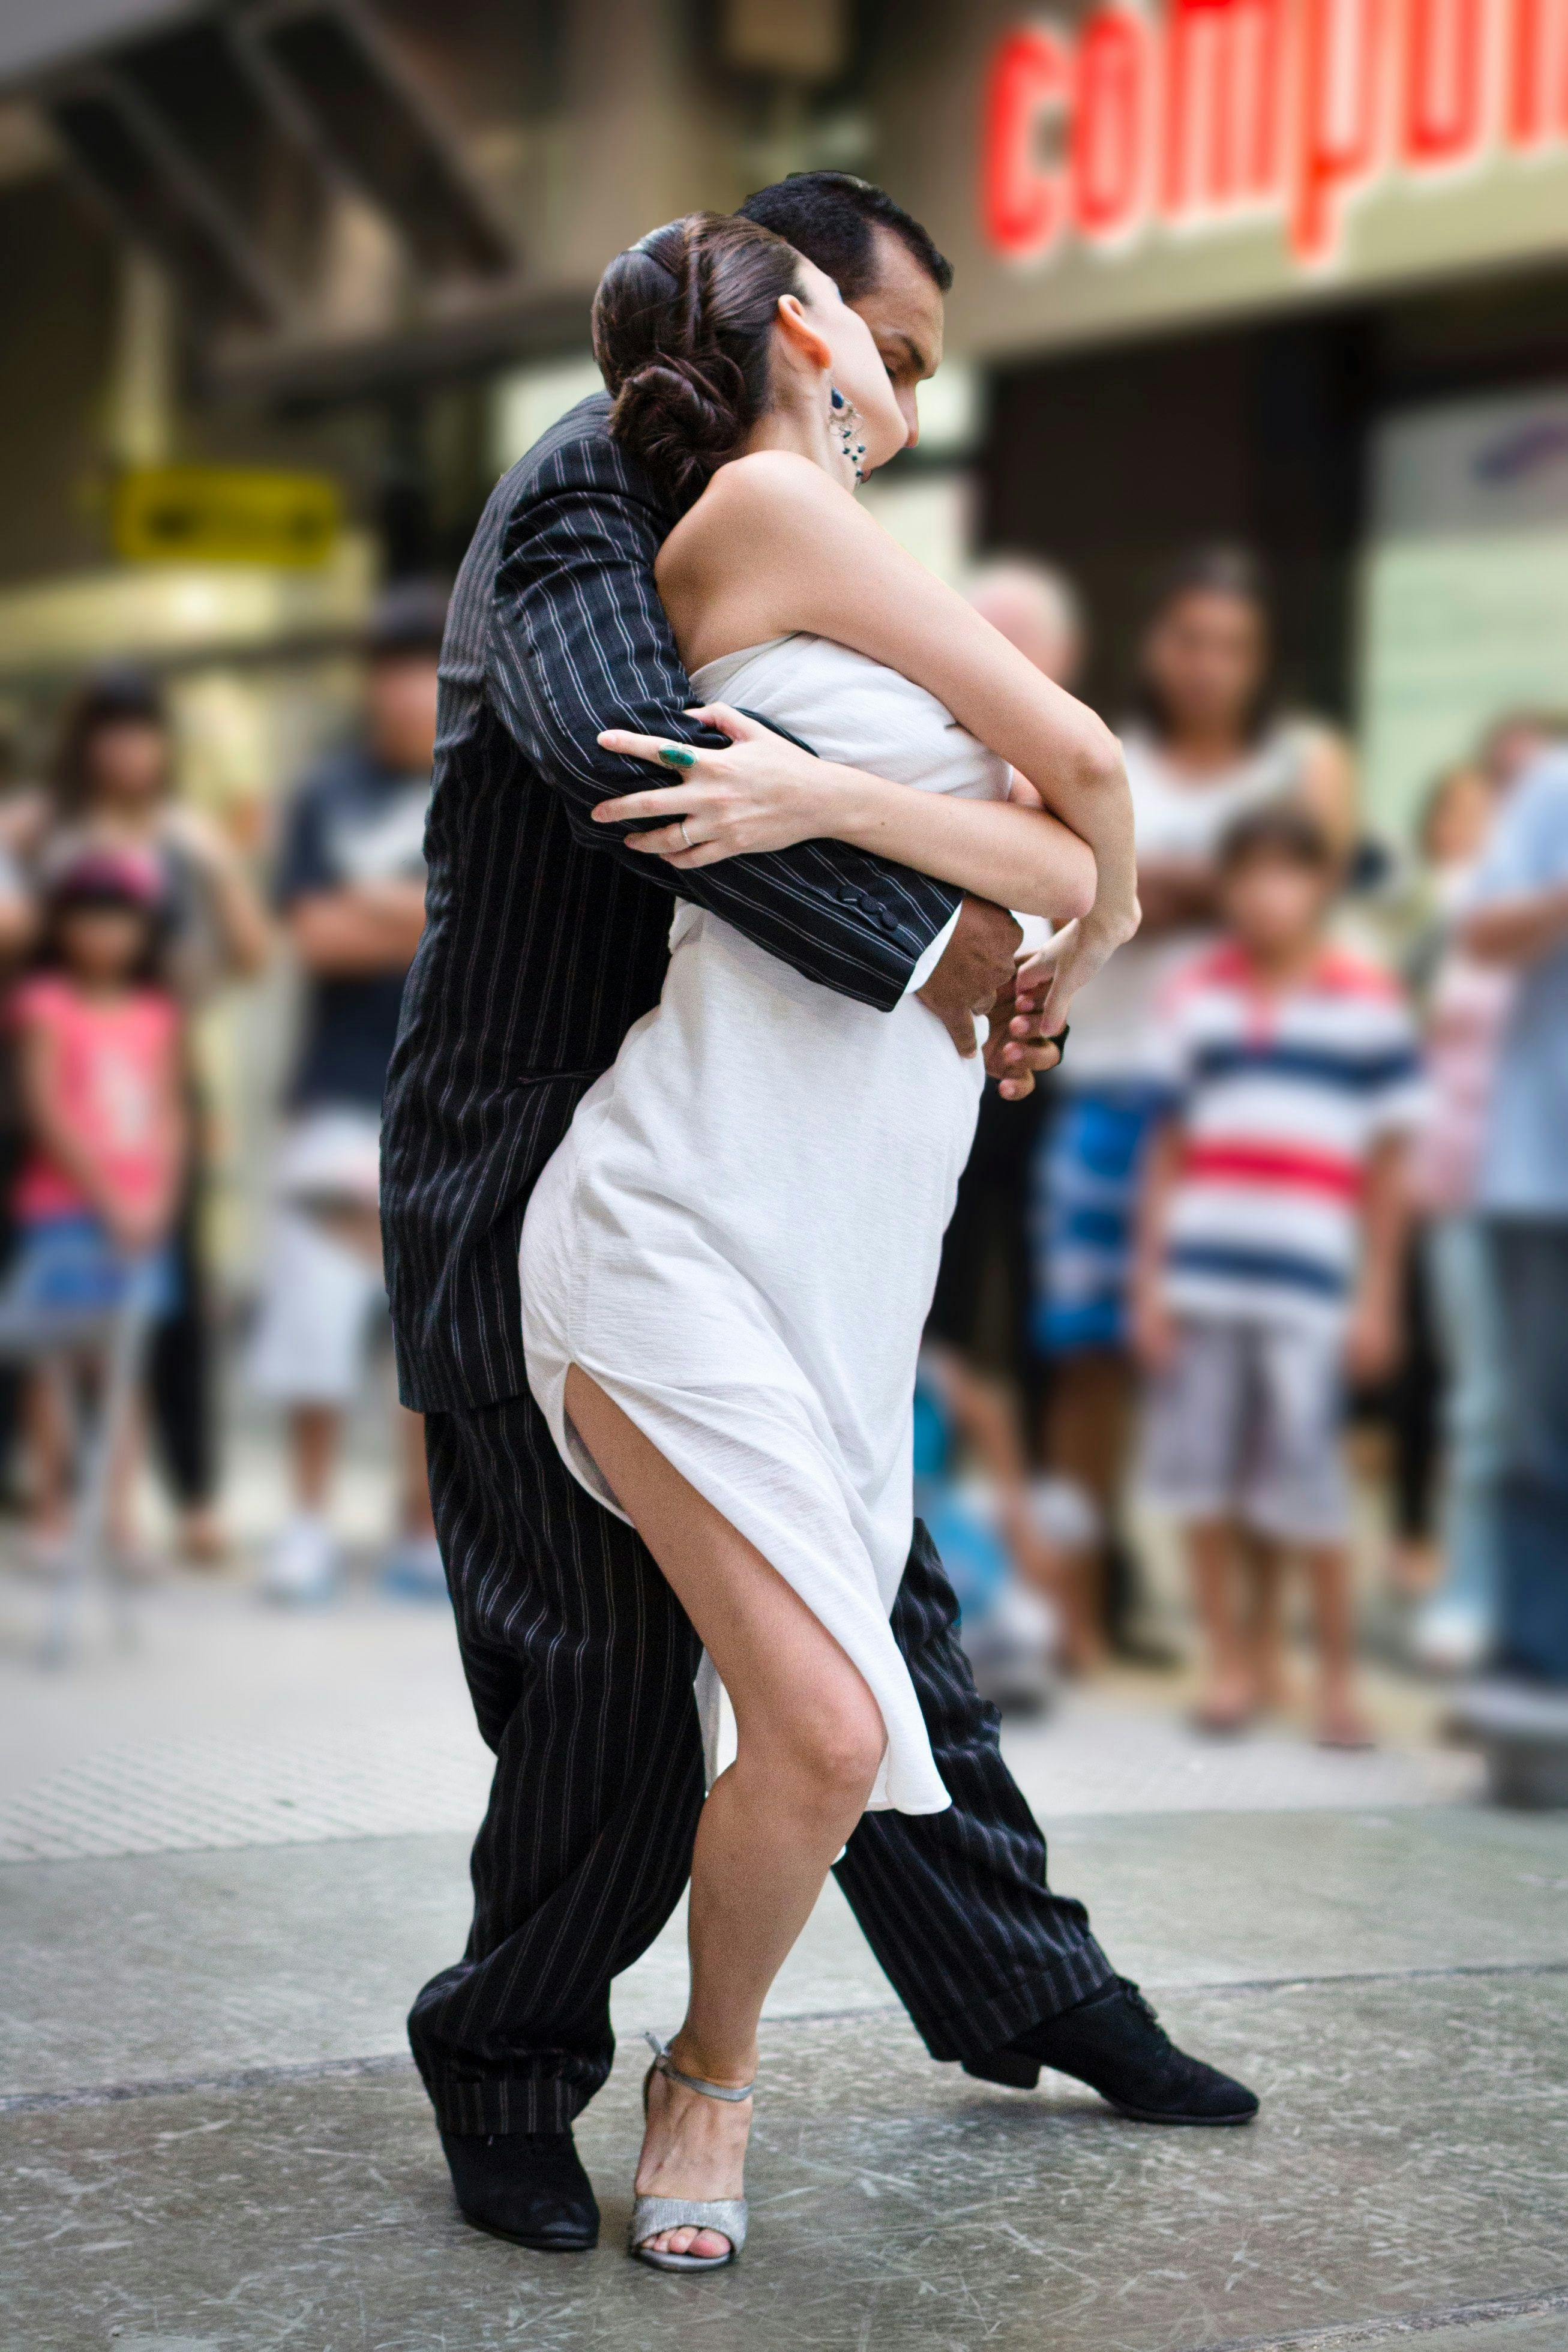 Couple dancing tango in Buenos Aires.